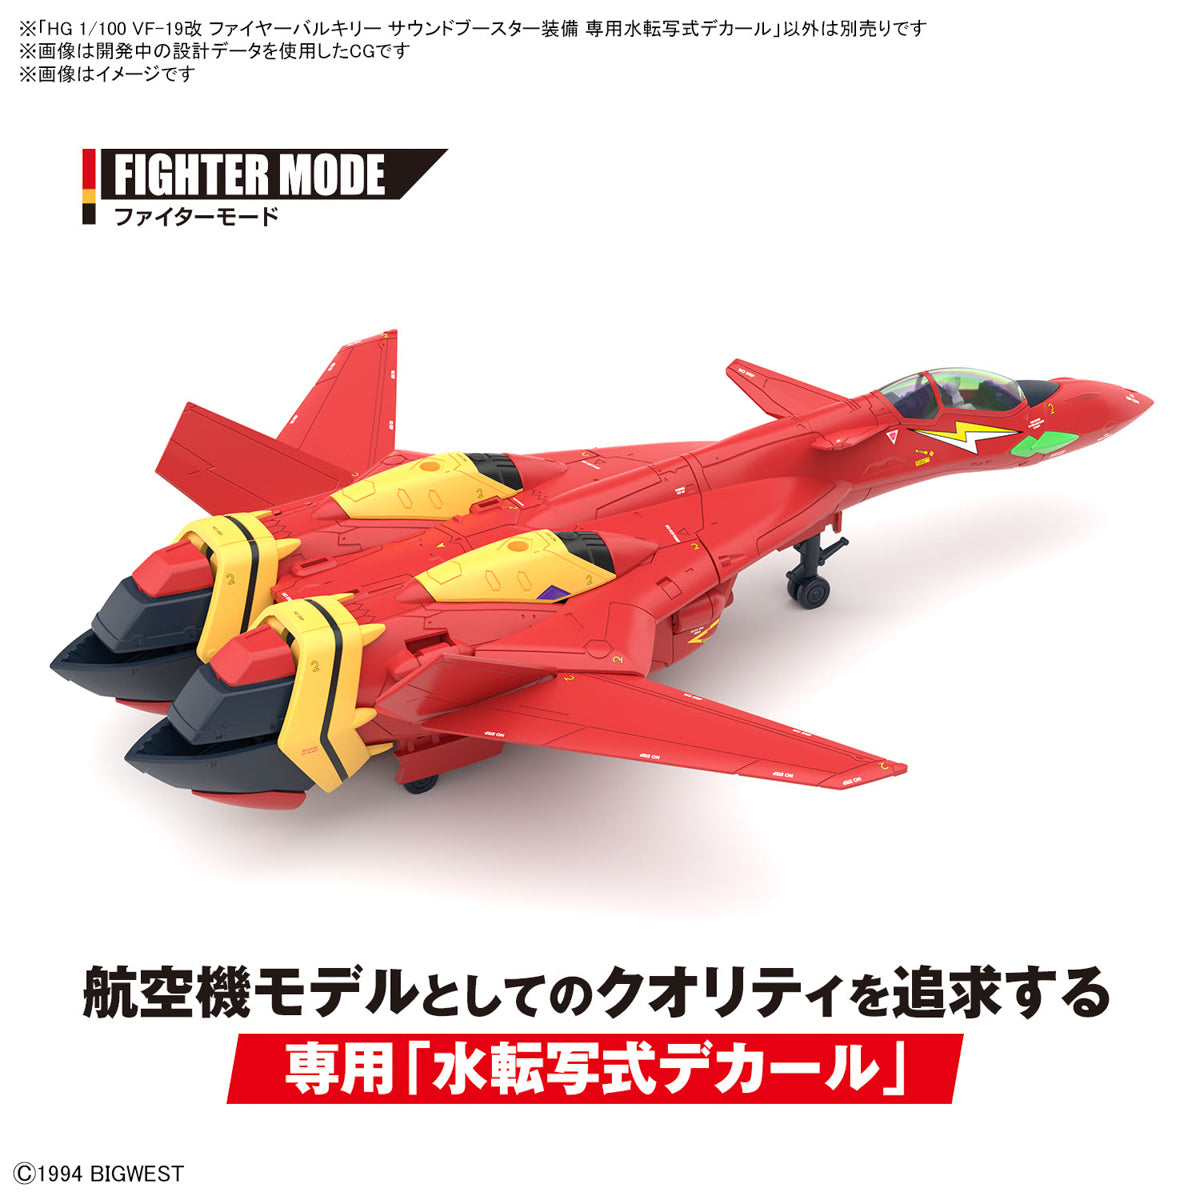 [PRE-ORDER] Water Decals for HG 1/100 VF-19 Fire Valkyrie with Sound Booster (Macross)